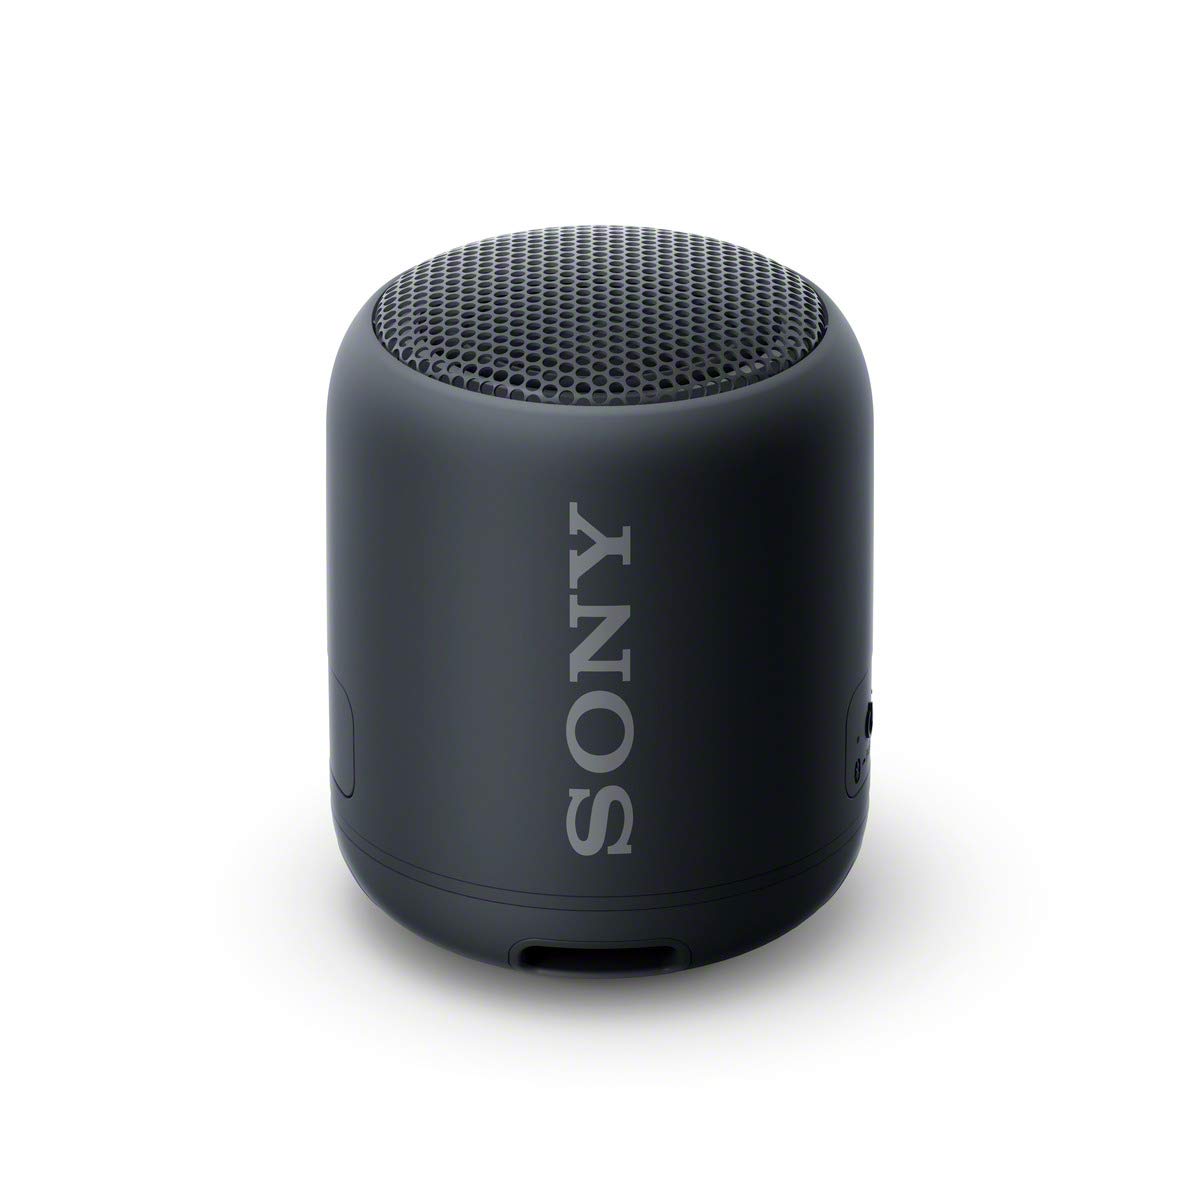 Sony Srs-XB12 Compact - Best Travel Gifts